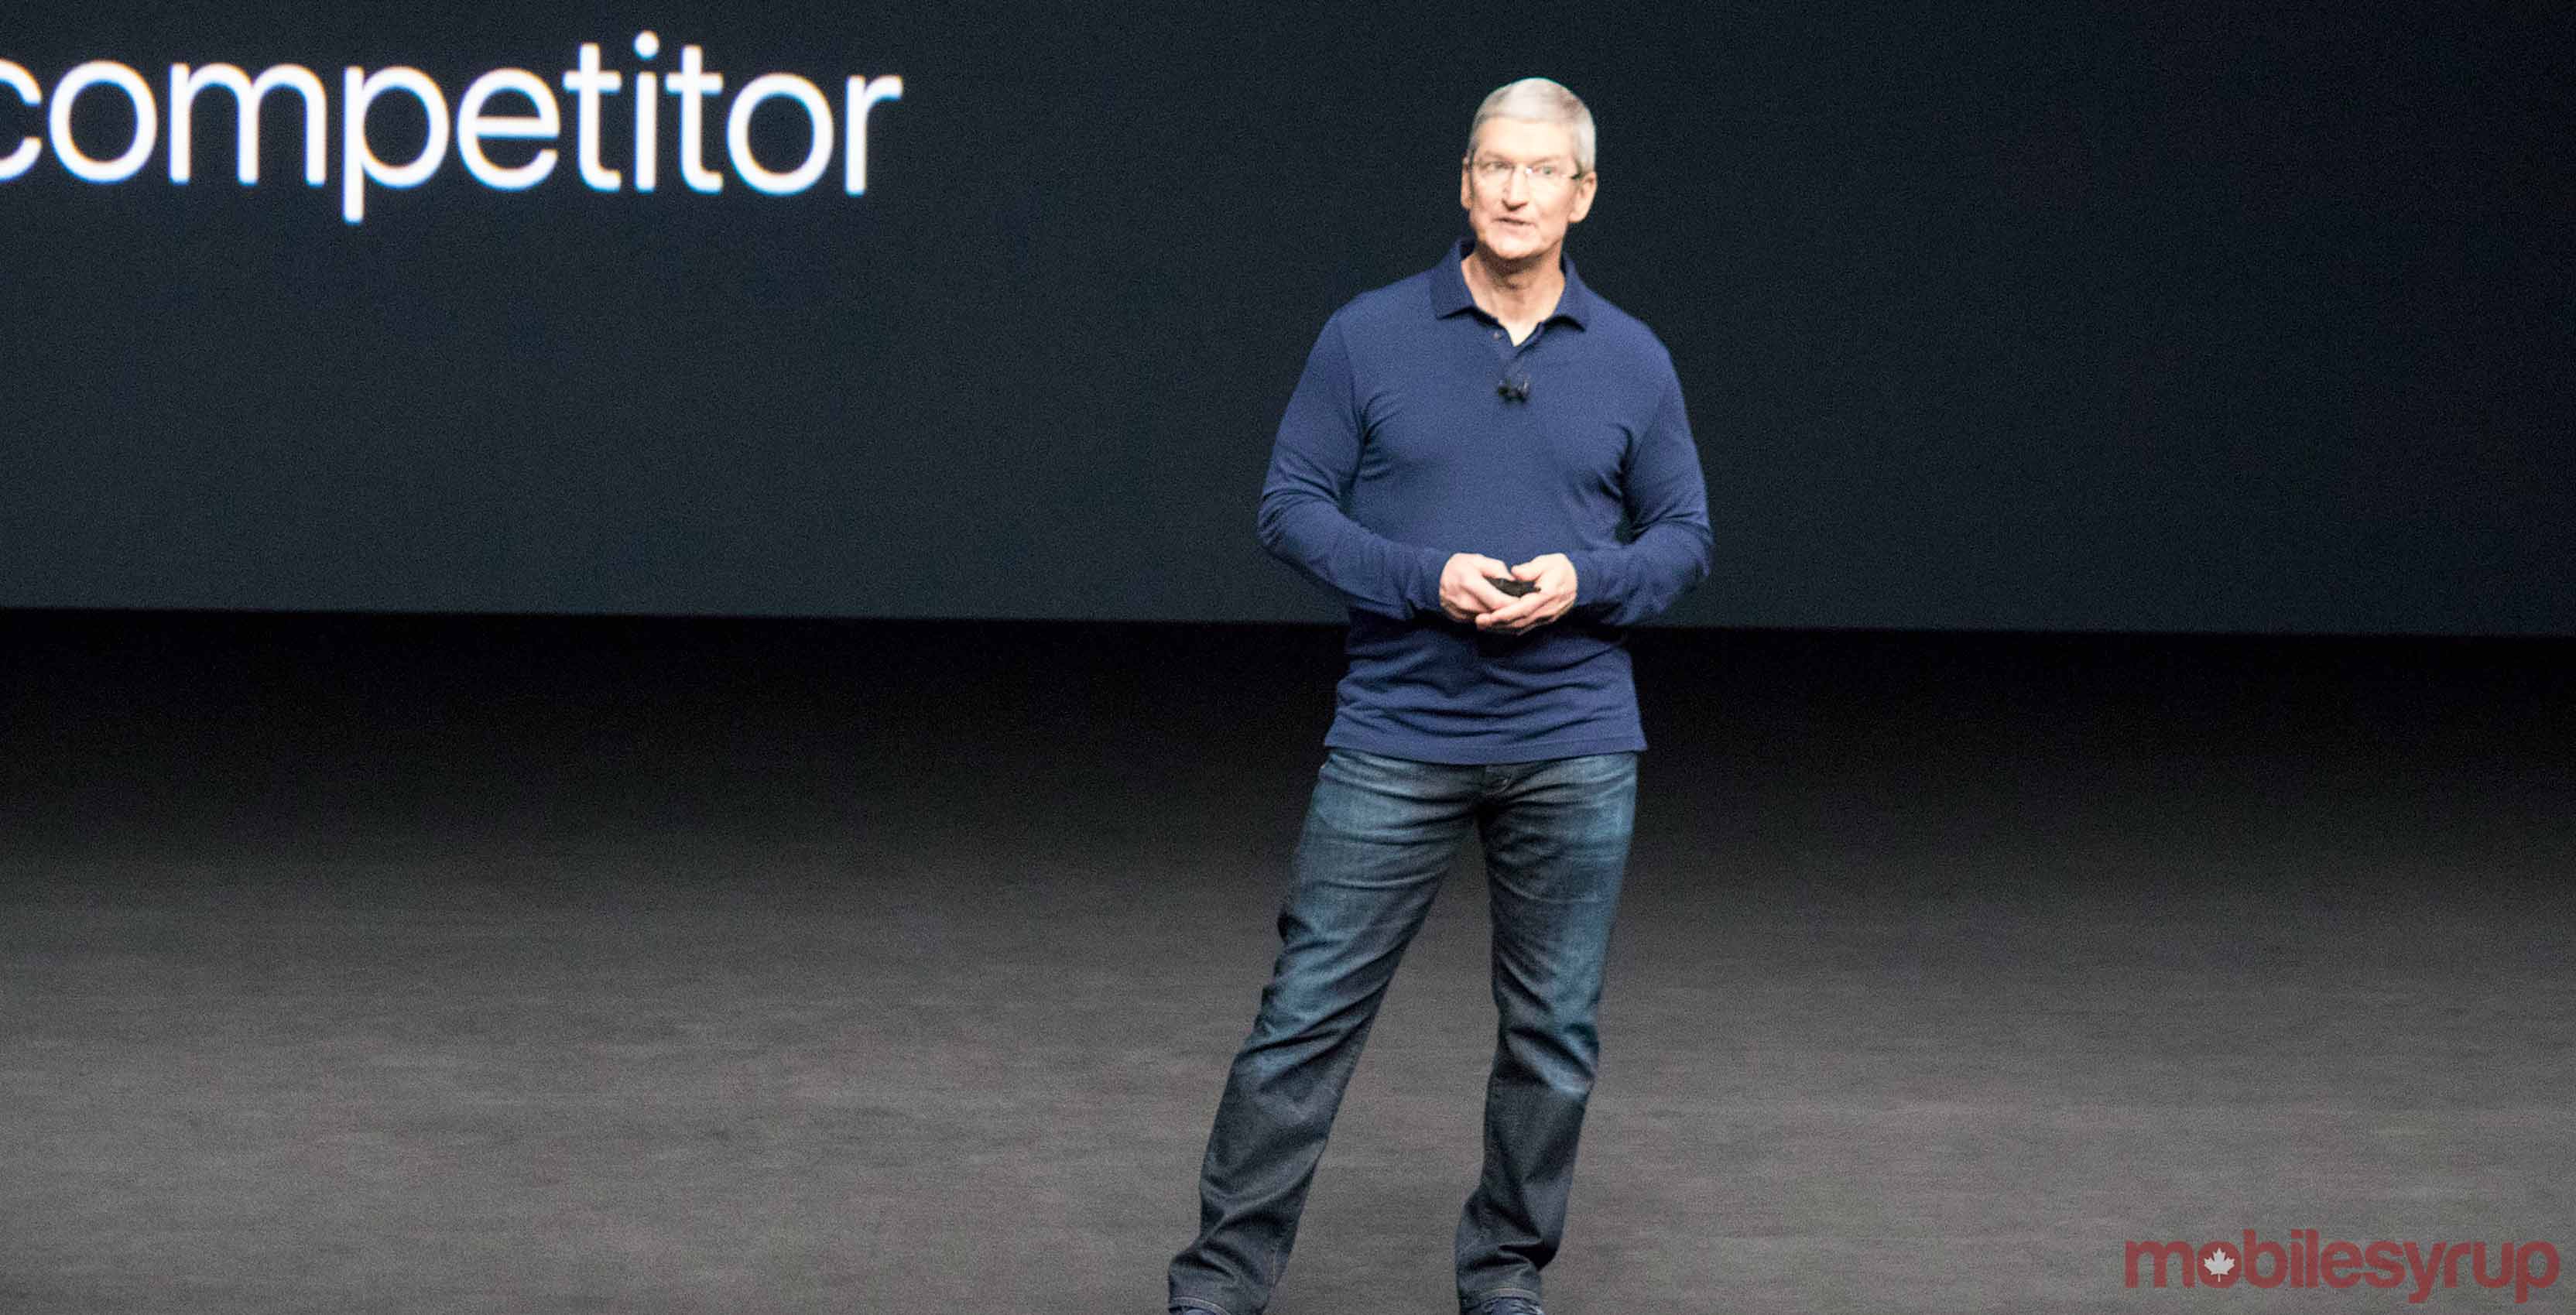 TIm Cook on stage